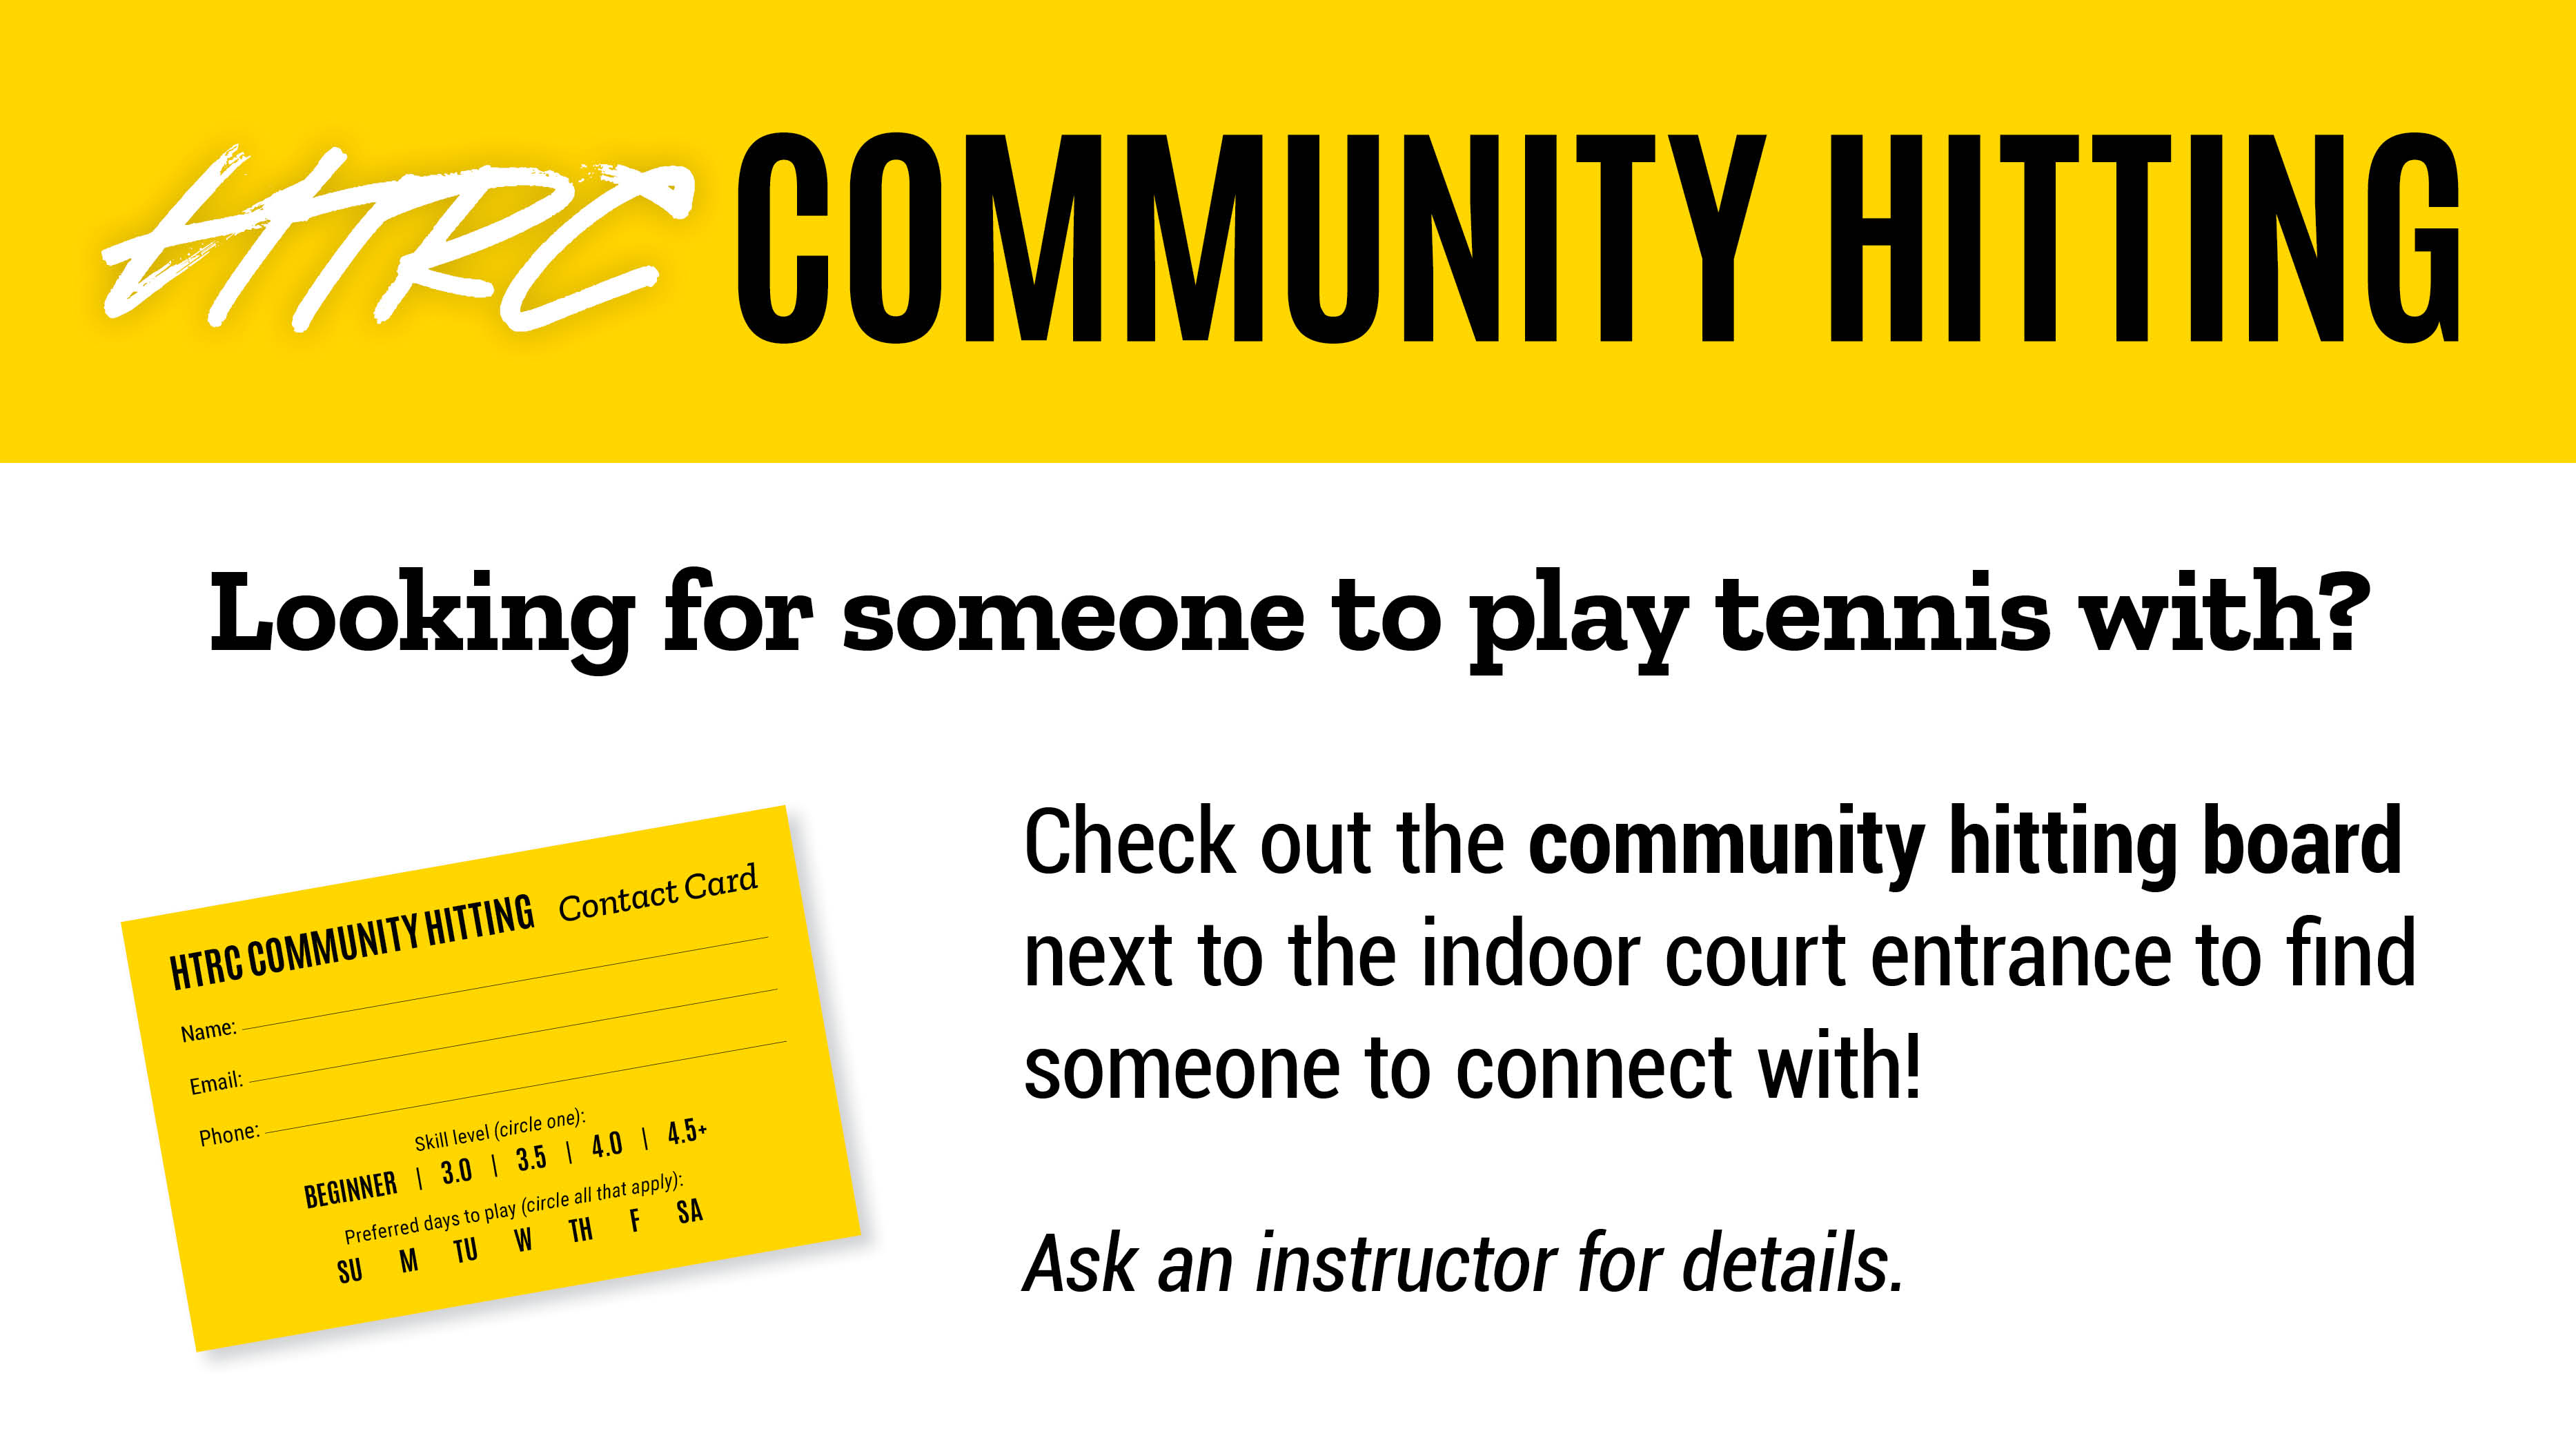 HTRC Community Hitting. Looking for someone to play tennis with? Check out the community hitting board next to the indoor court entrance to find someone to connect with! Ask an instructor for details.